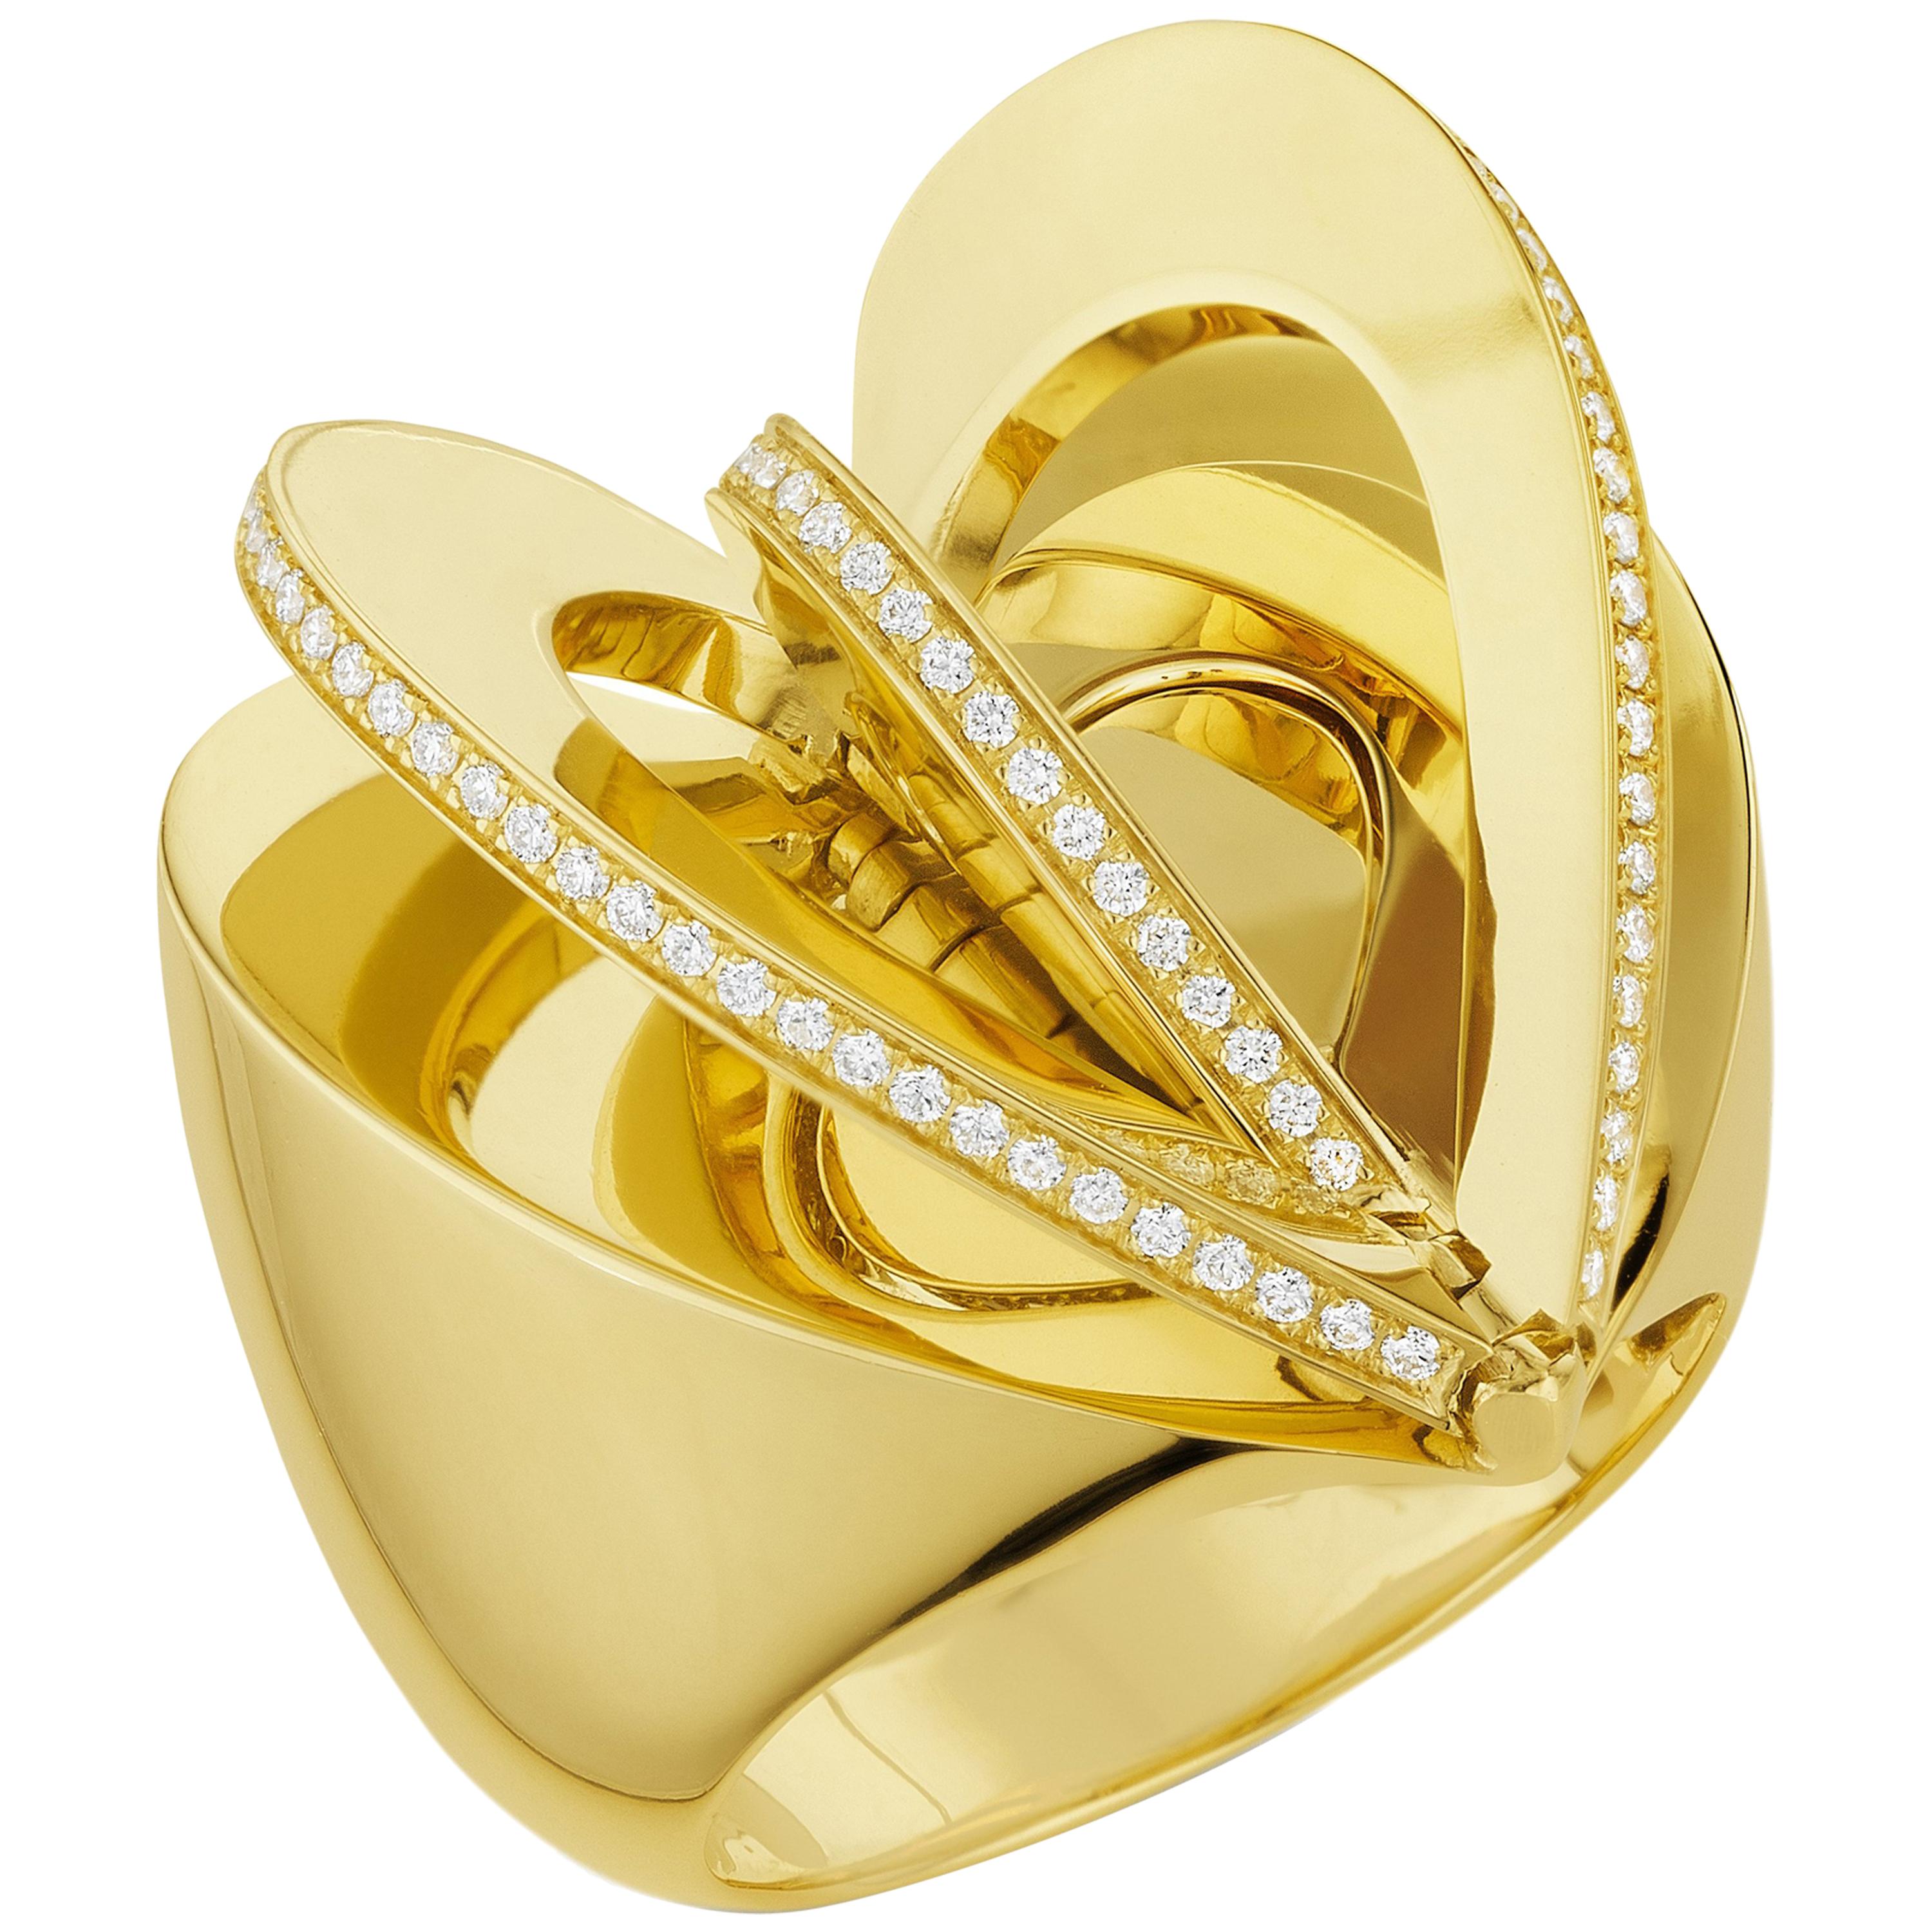 CADAR Endless Cocktail Ring, 18K Yellow Gold and White Diamonds